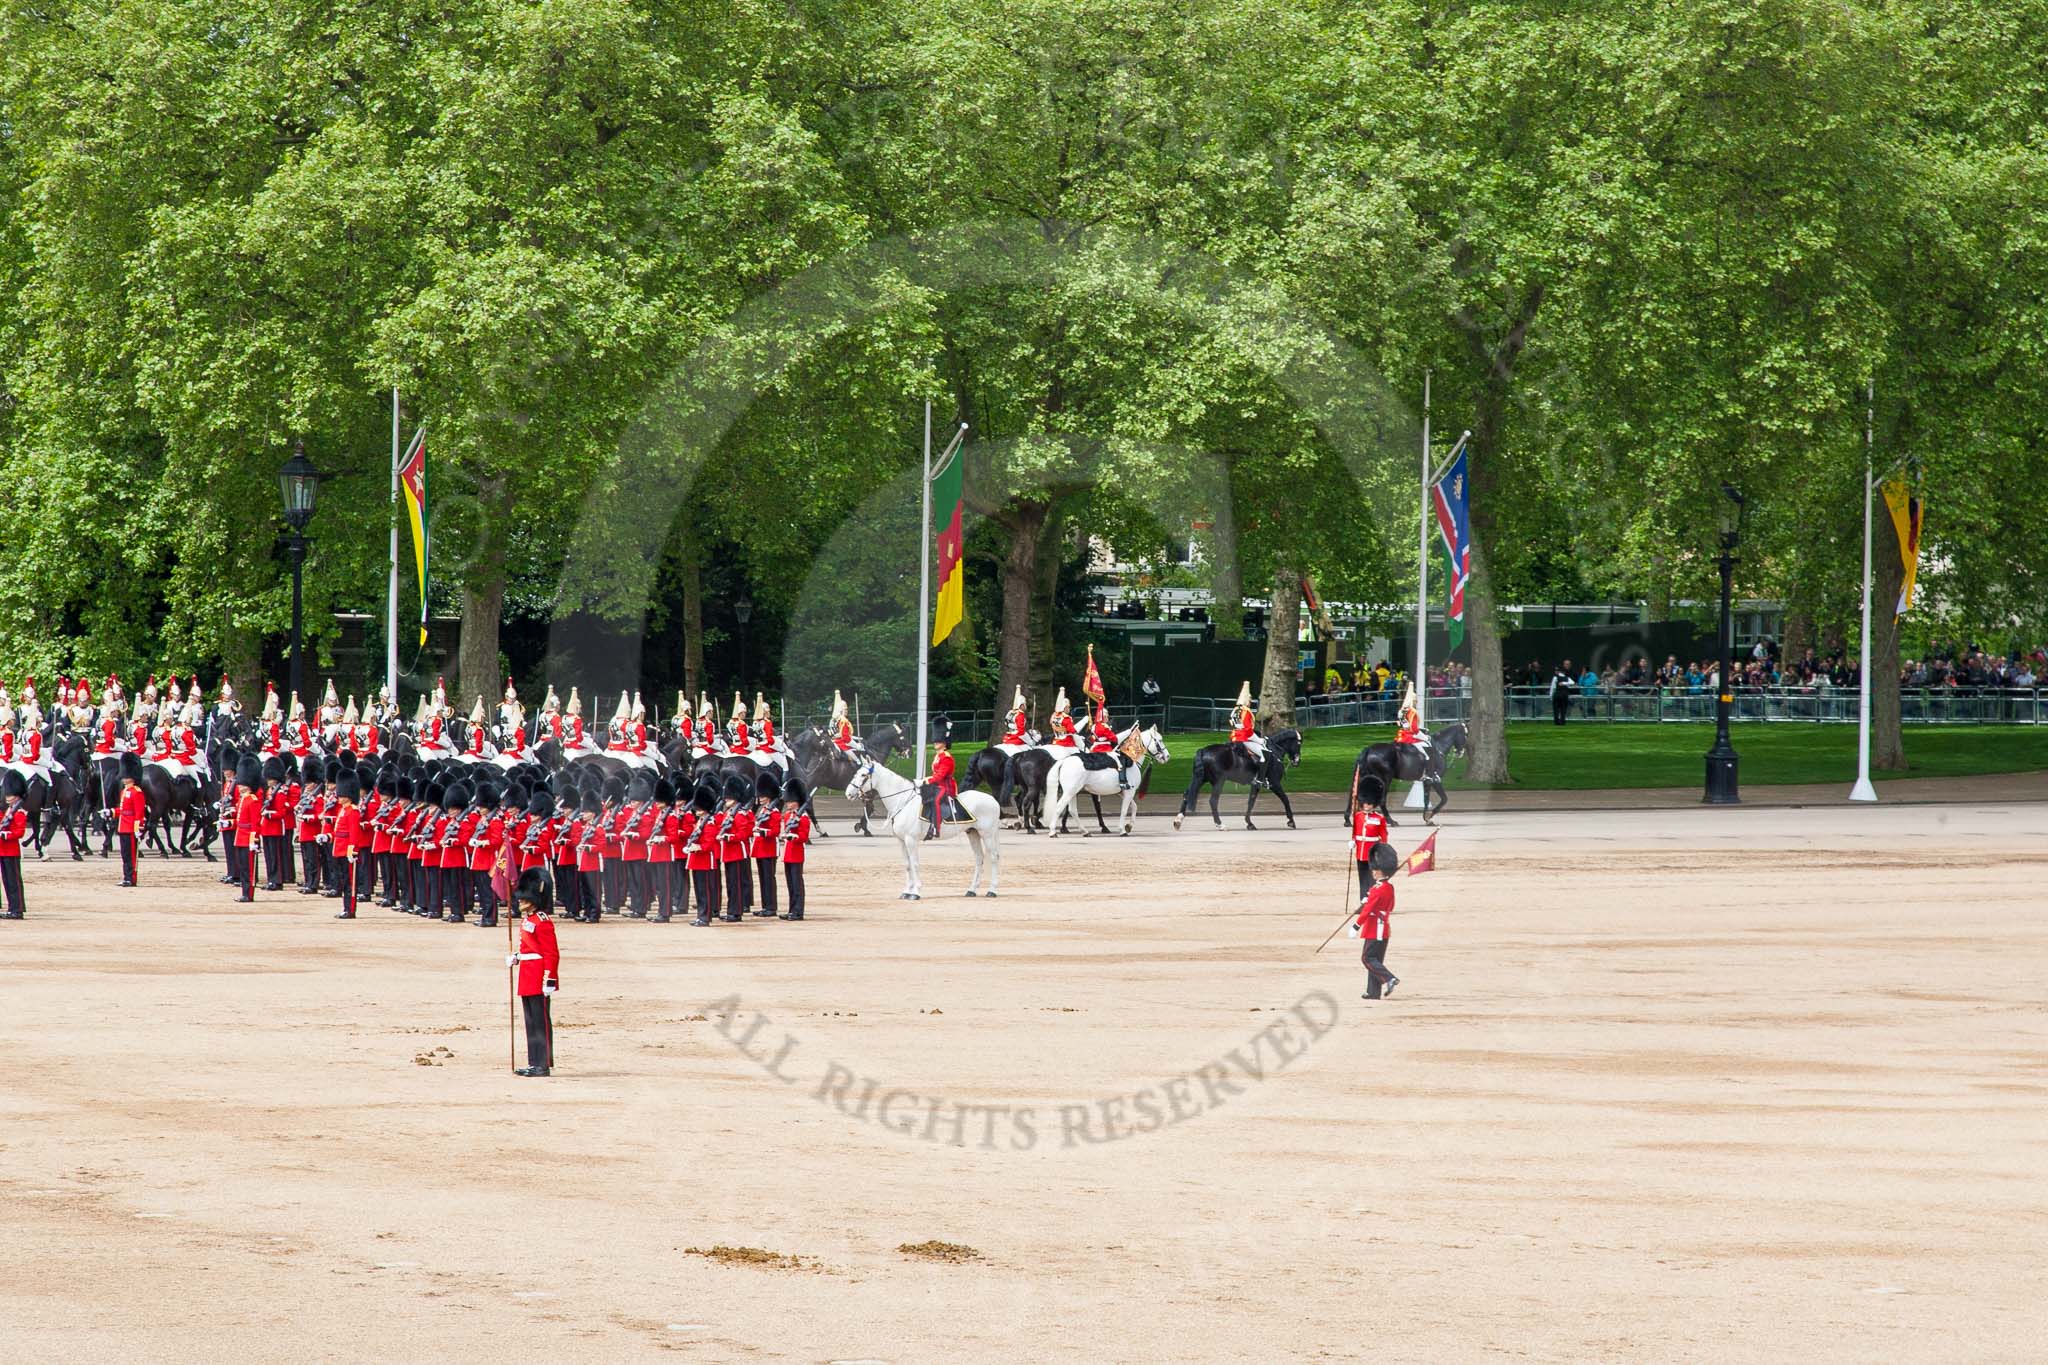 Major General's Review 2013: The Household Cavalry is marching off, led by the Field Officer of the Escort, Major Nick Stewart, The Life Guards, followed by the Trumpeter, Standard Bearer, Standard Coverer. and The Life Guards as first and second divisions of the Sovereign's Escort..
Horse Guards Parade, Westminster,
London SW1,

United Kingdom,
on 01 June 2013 at 12:03, image #689